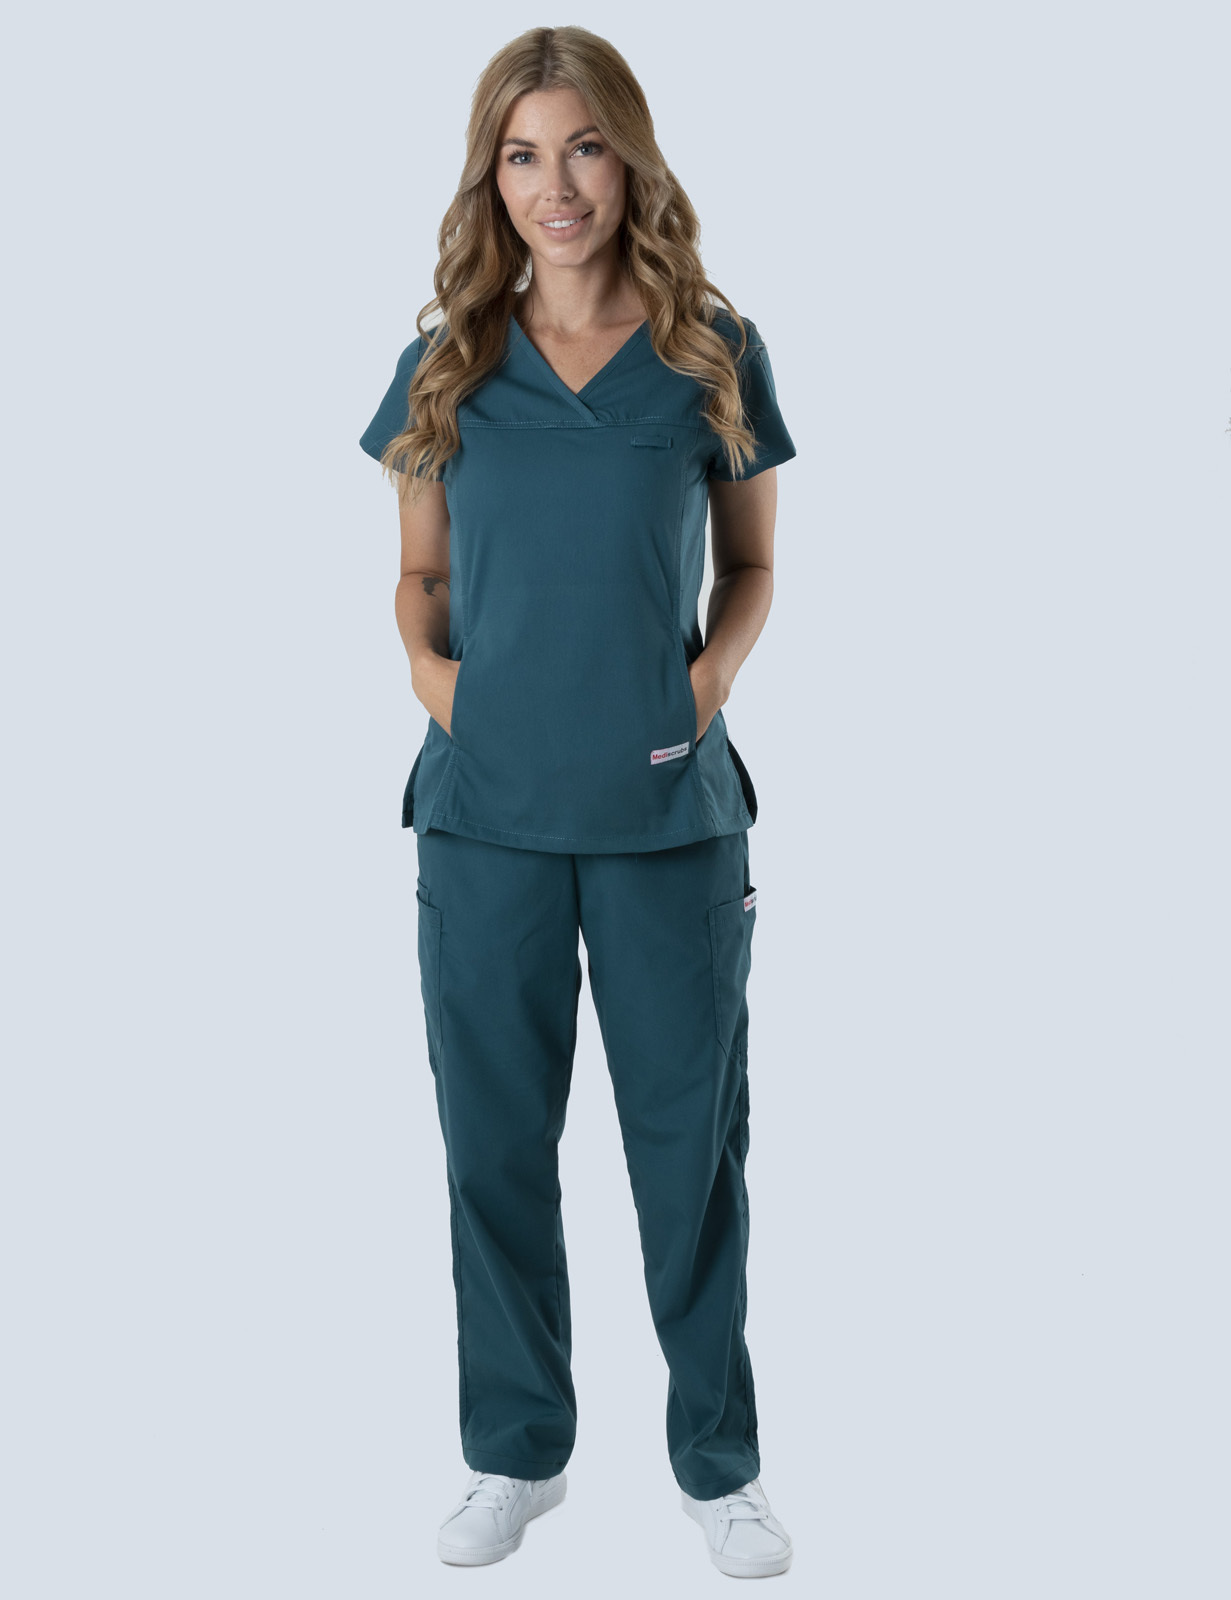 Women's Fit Solid Scrub Top - Caribbean - 3X Large - 2